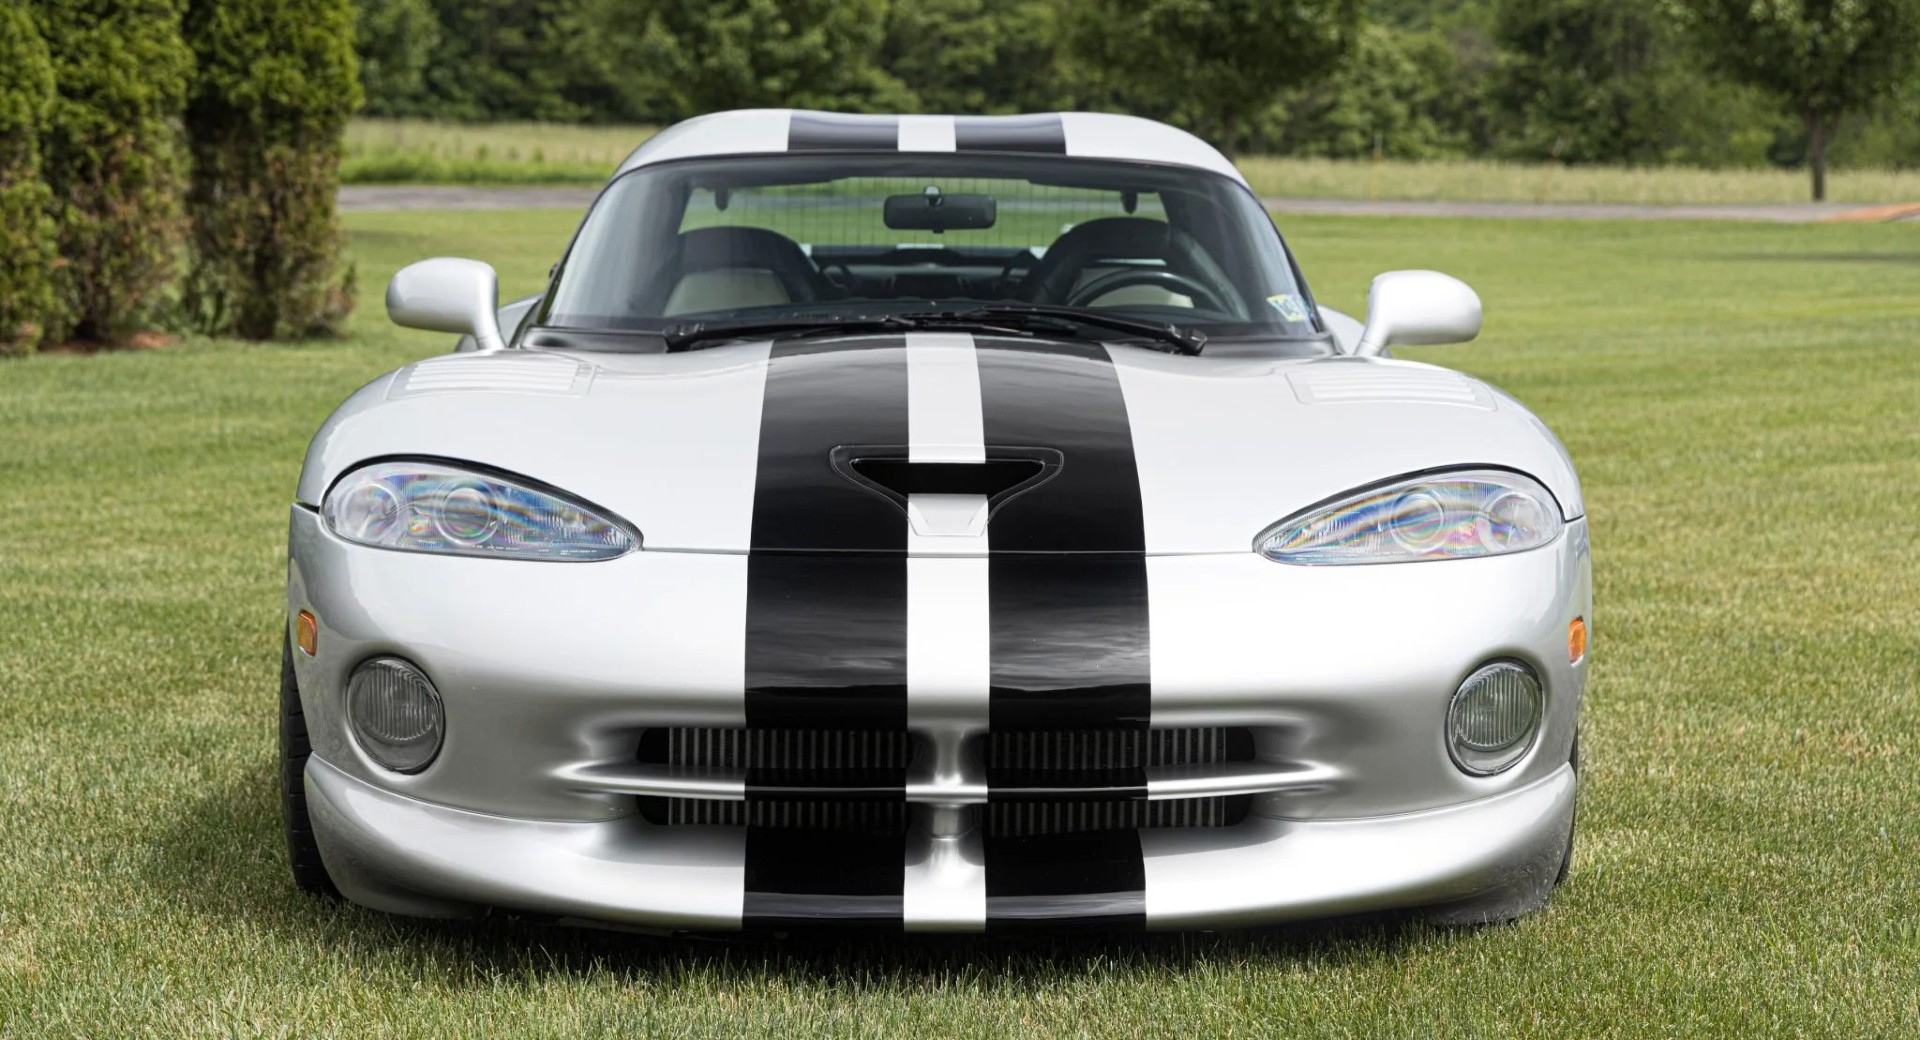 1998 Dodge Viper GTS Up For Auction Has Two Turbochargers, Almost 900 HP  And No Reserve | Carscoops